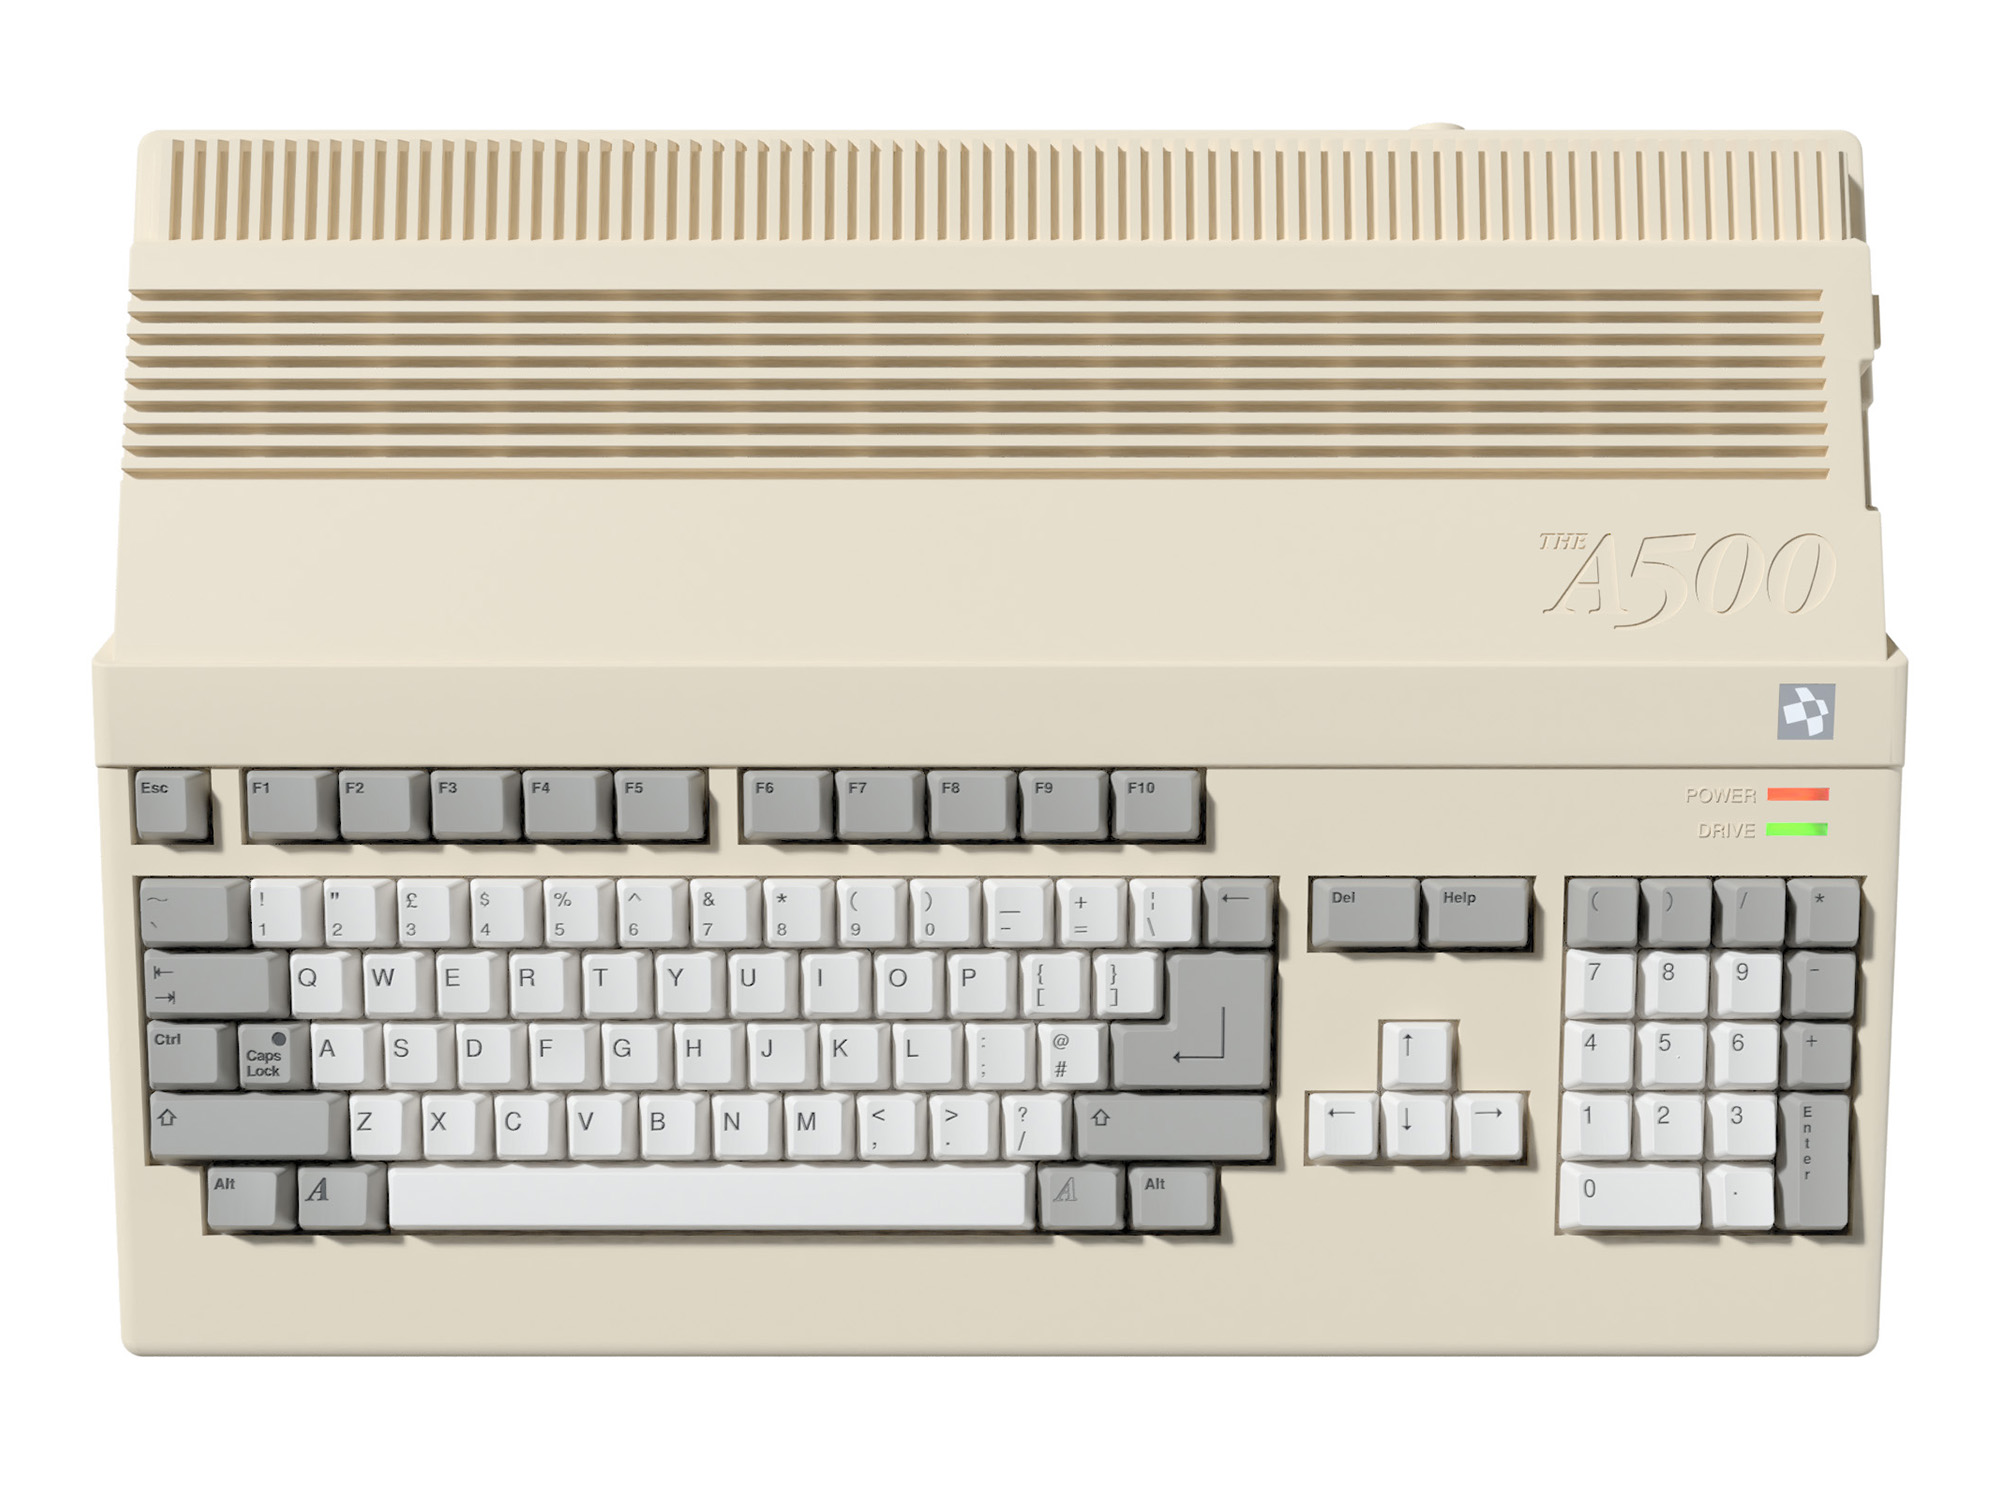 Amiga 500 Returns Next Year as Mini Game Console for $139